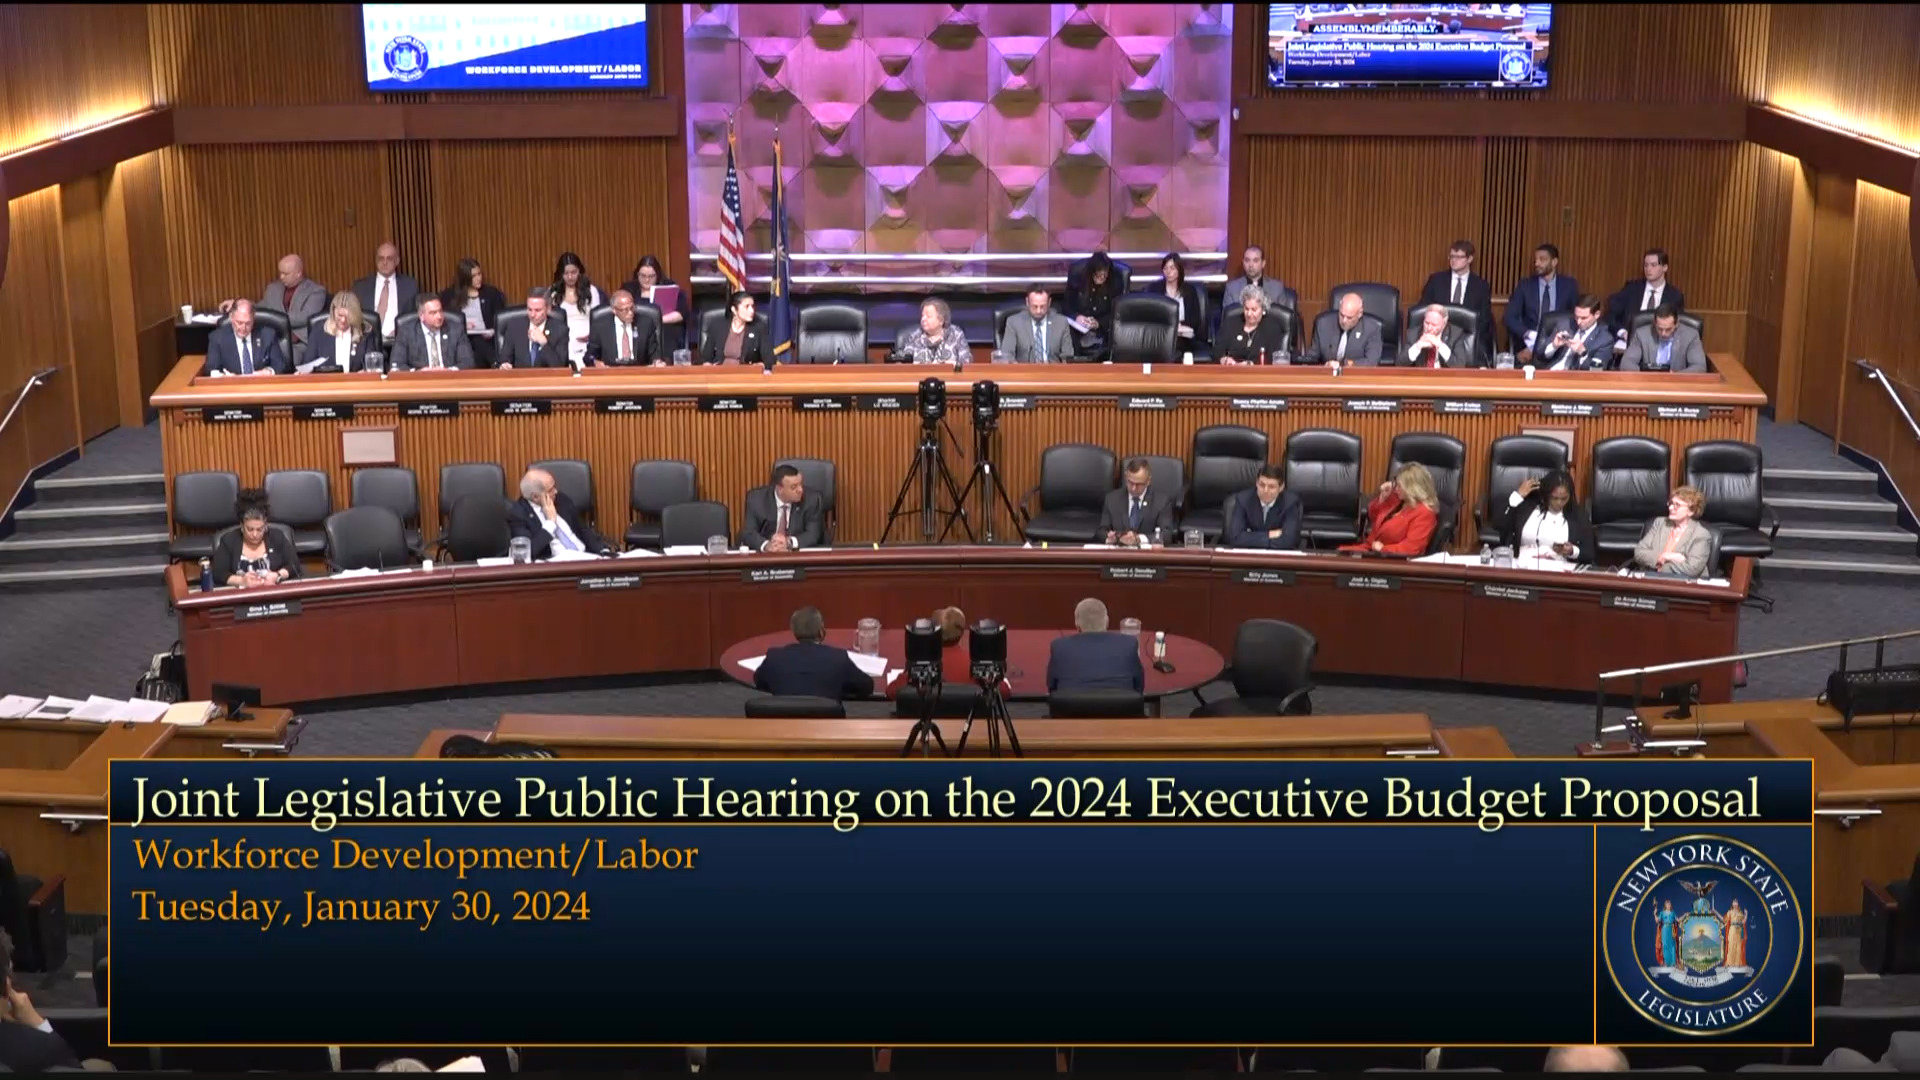 State Officials Testify During Budget Hearing on Workforce Development/Labor